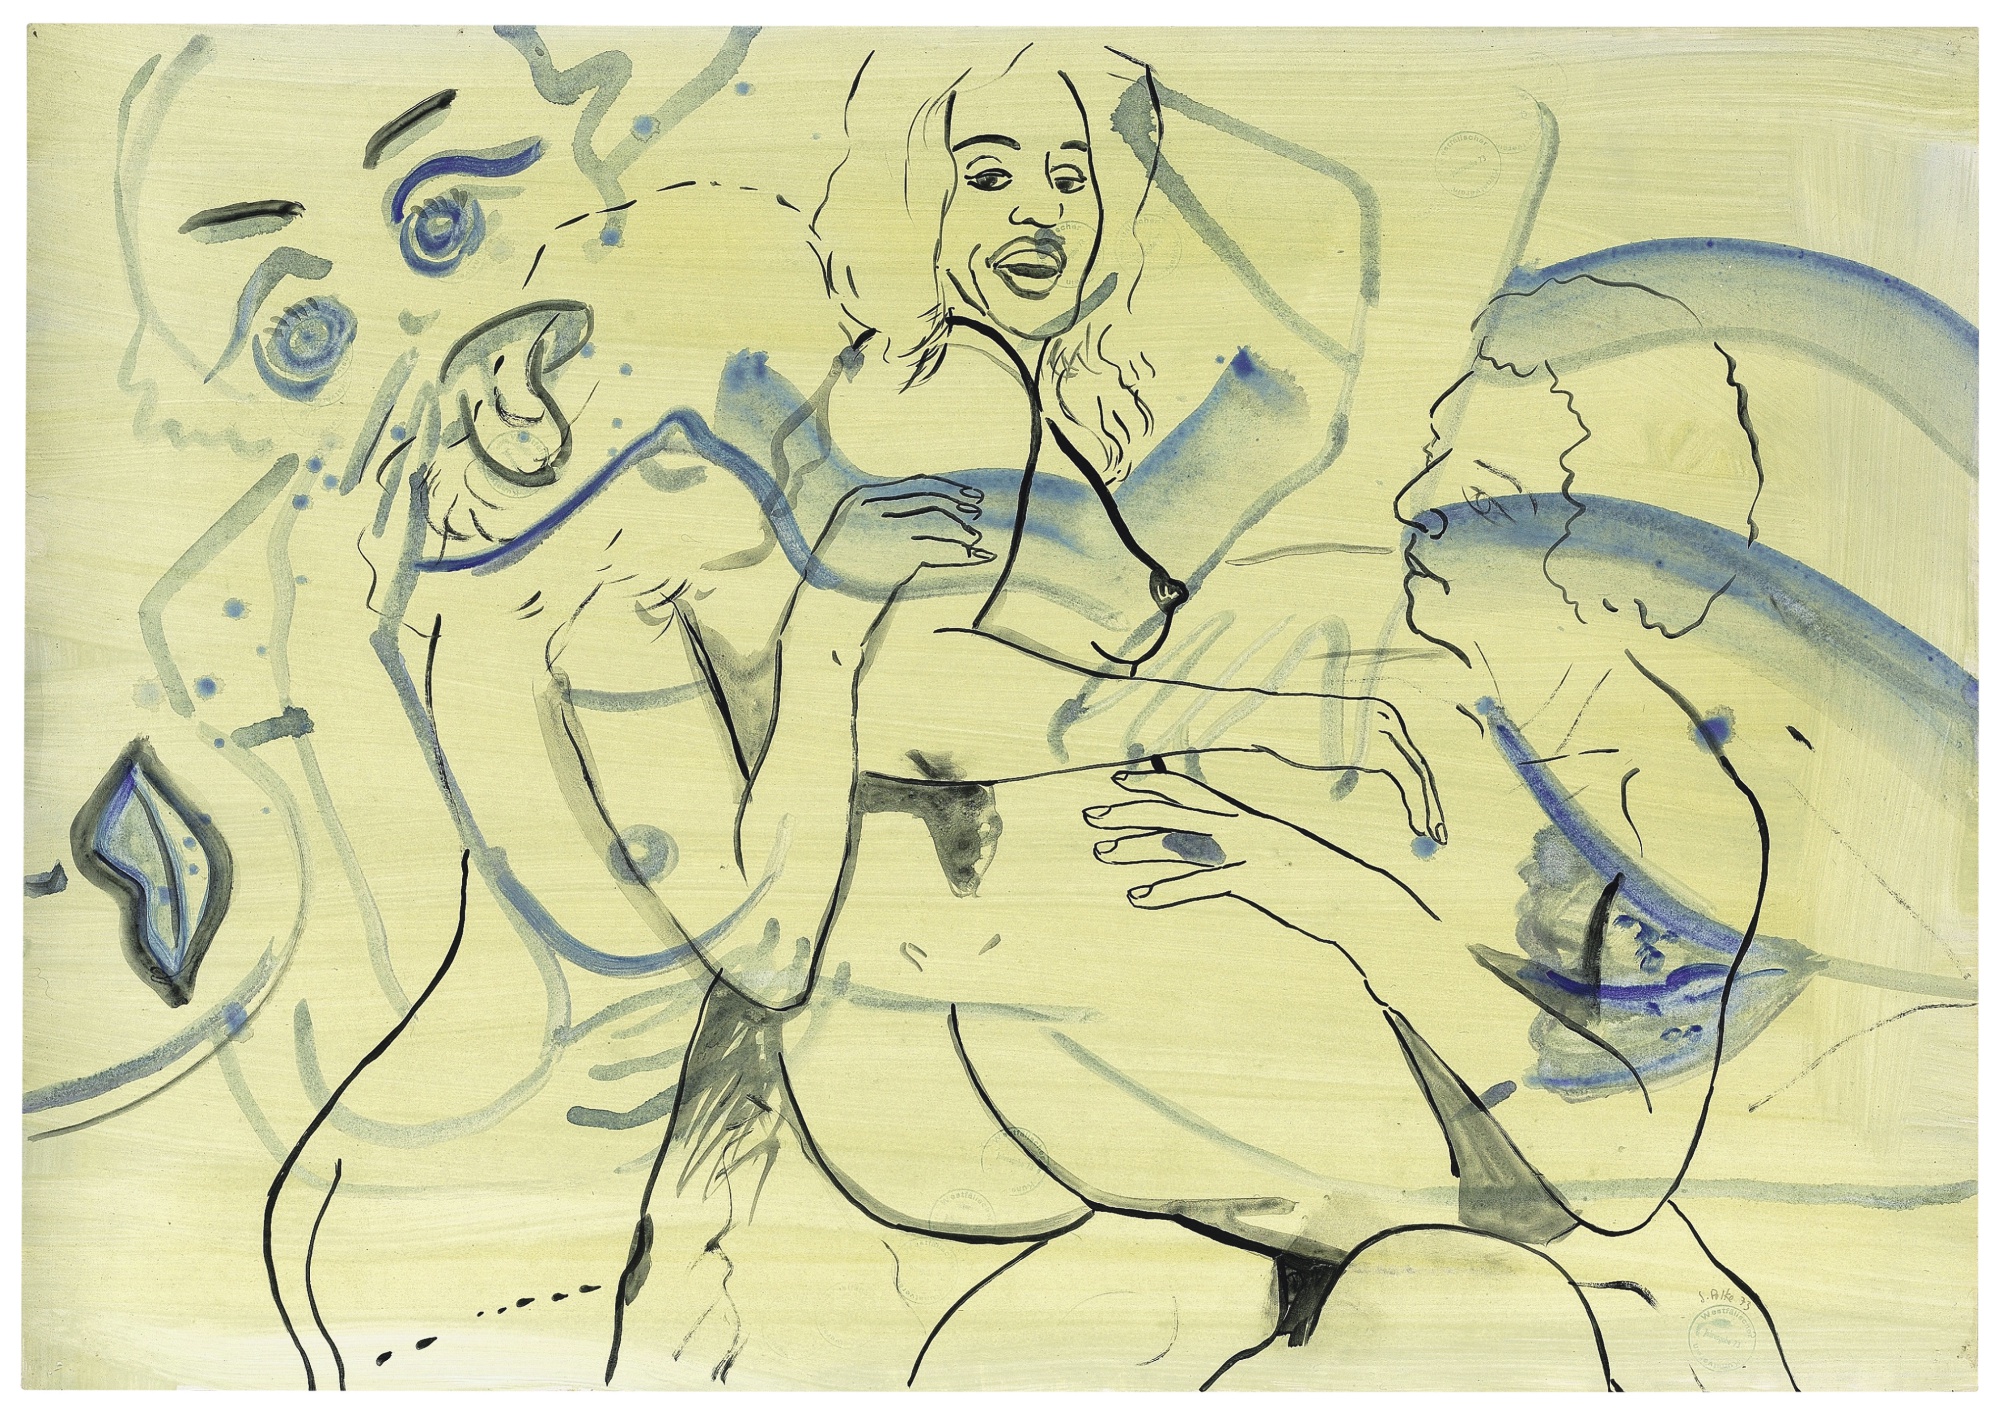 Untitled (1973) by Sigmar Polke, lot 17 in Sotheby's forthcoming Erotic: Passion and Desire sale.
All images courtesy of Sotheby's